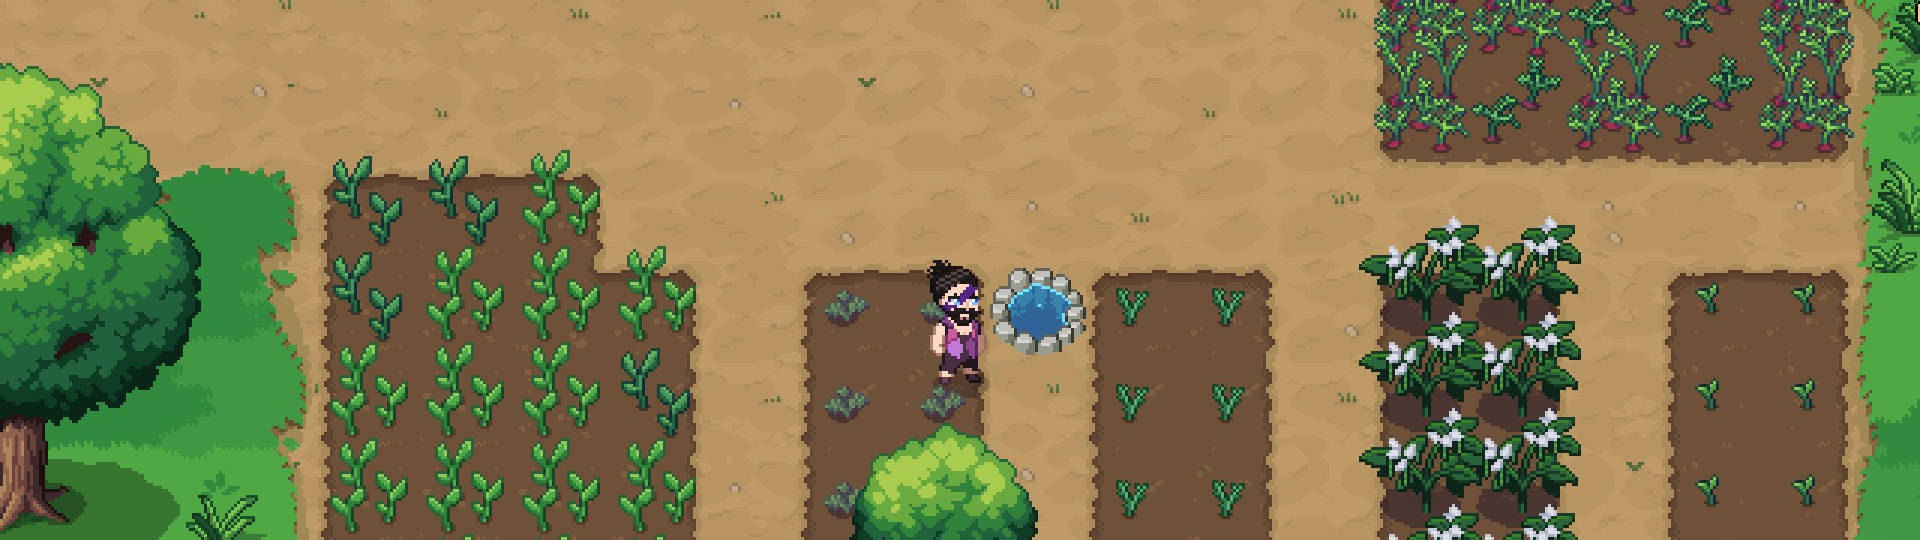 Standing next to a Well in the Middle of the Farming Field in Roots of Patcha